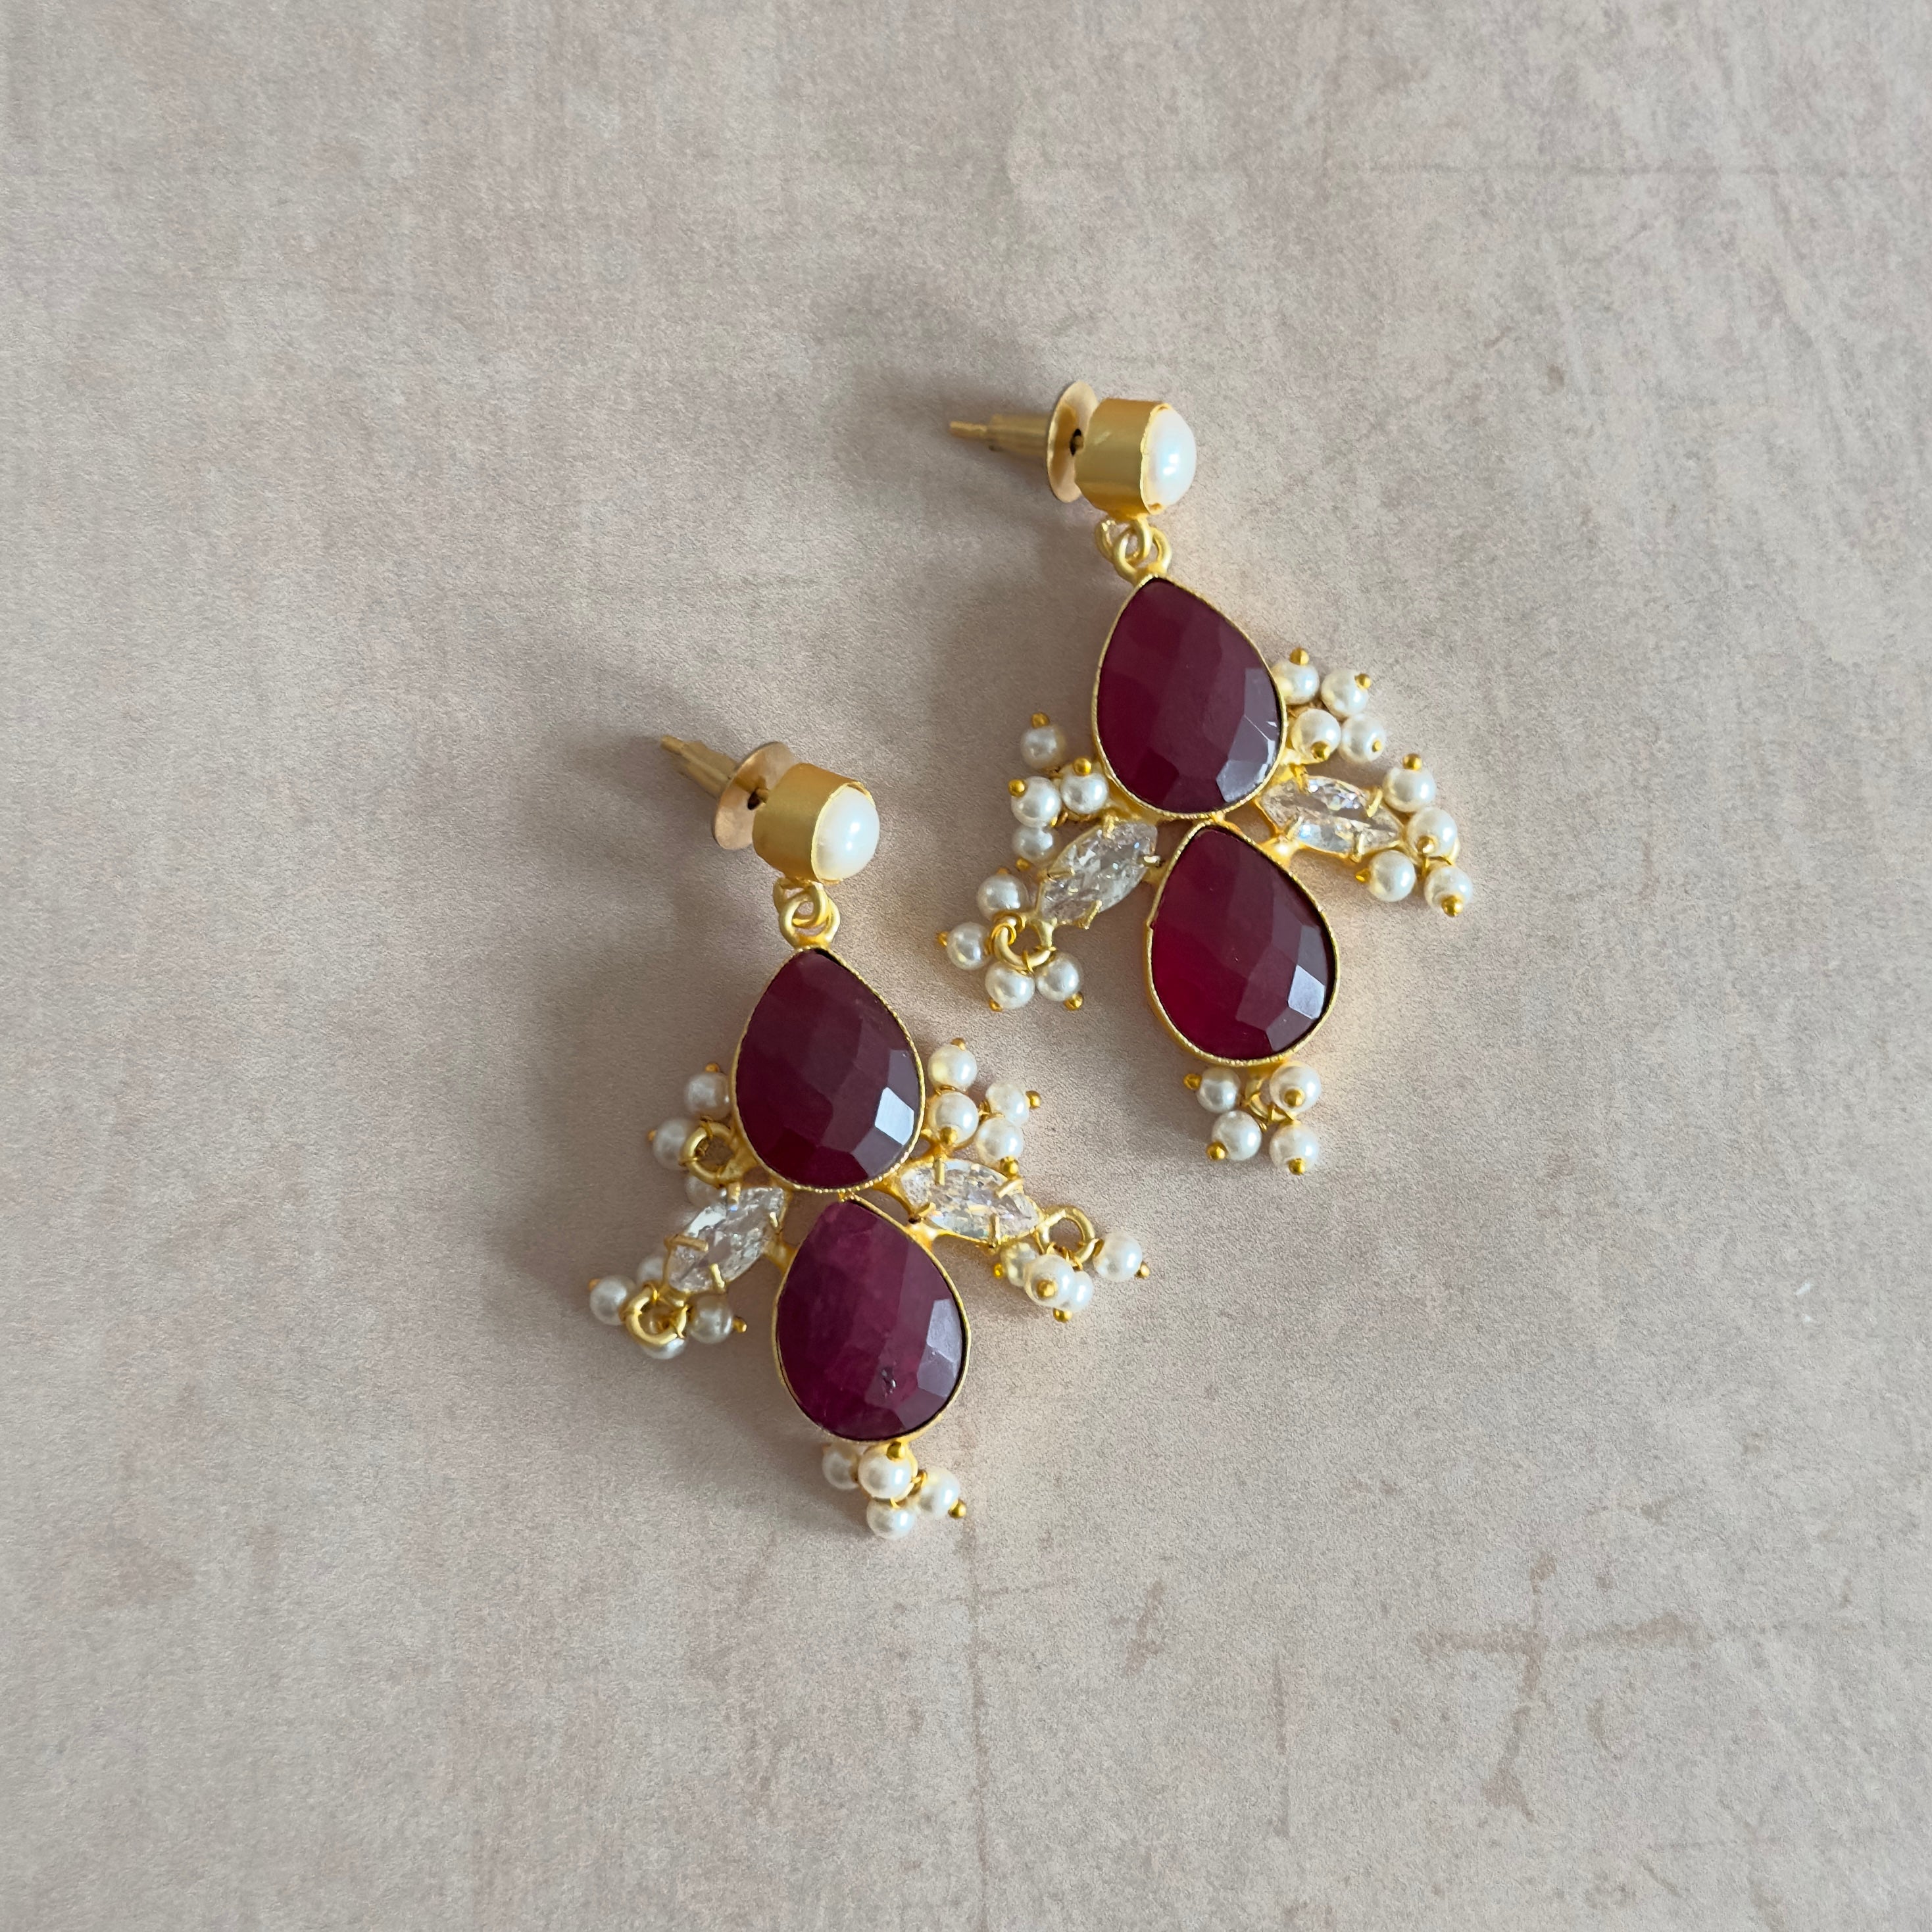 Elevate any outfit with our Maroon Pearl Drop Earrings. The deep red color of the cubic zirconia stones paired with the classic pearl accent creates a stunning and bold look. Add a touch of sophistication and glamour to your wardrobe with these elegant earrings.